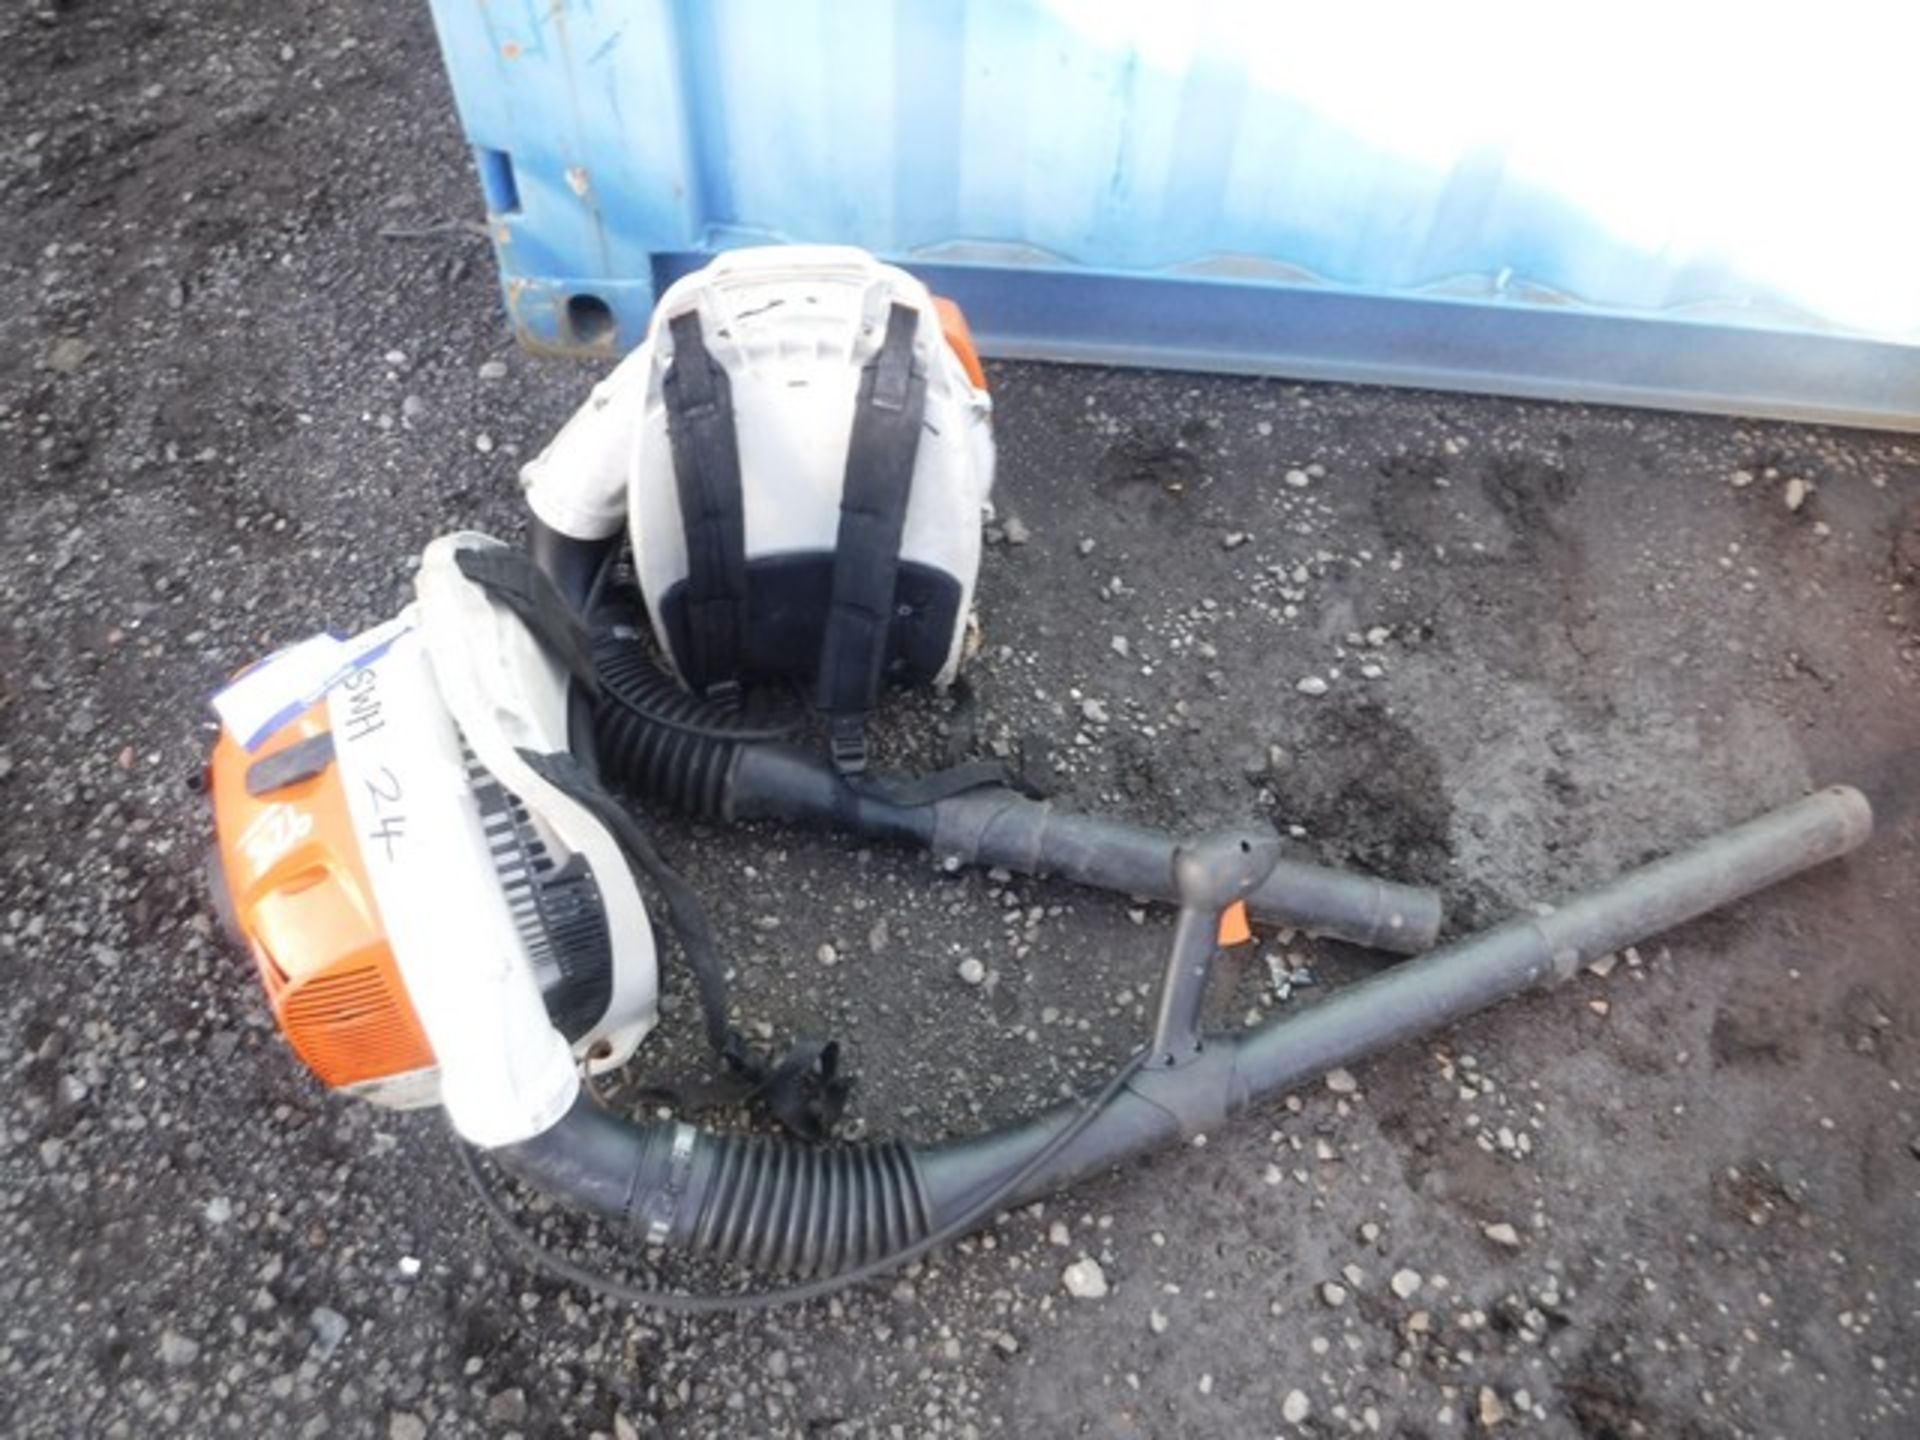 STIHL BR350 PETROL LEAFBLOWER AND HARNESS x2 - Image 2 of 3